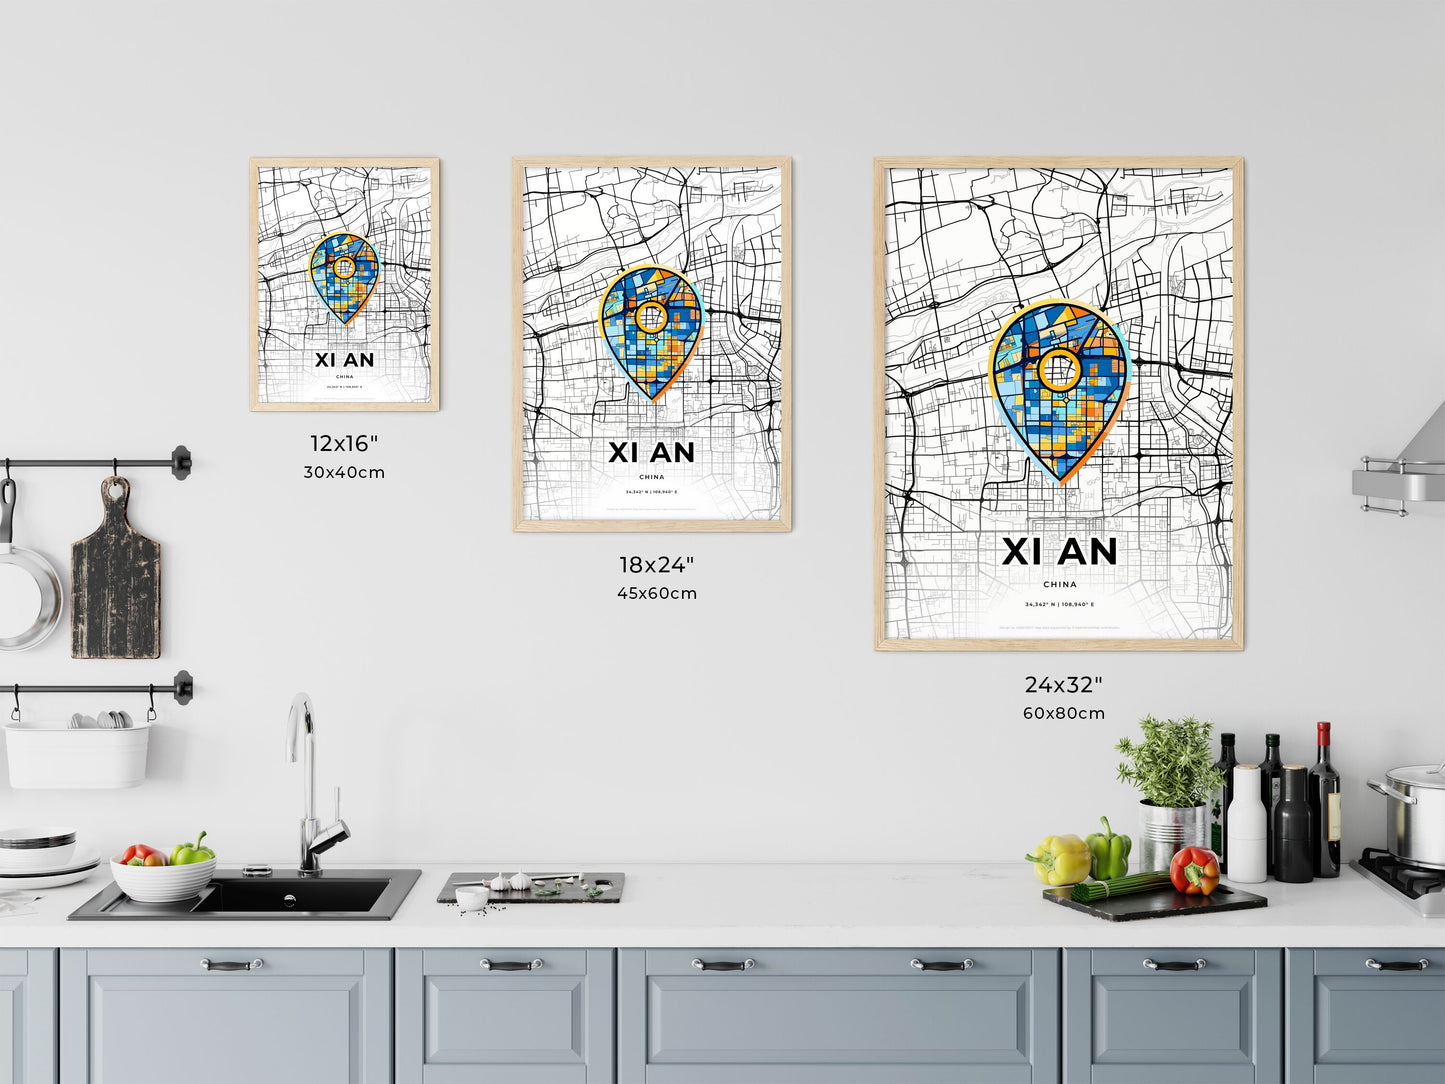 XI AN CHINA minimal art map with a colorful icon. Where it all began, Couple map gift.